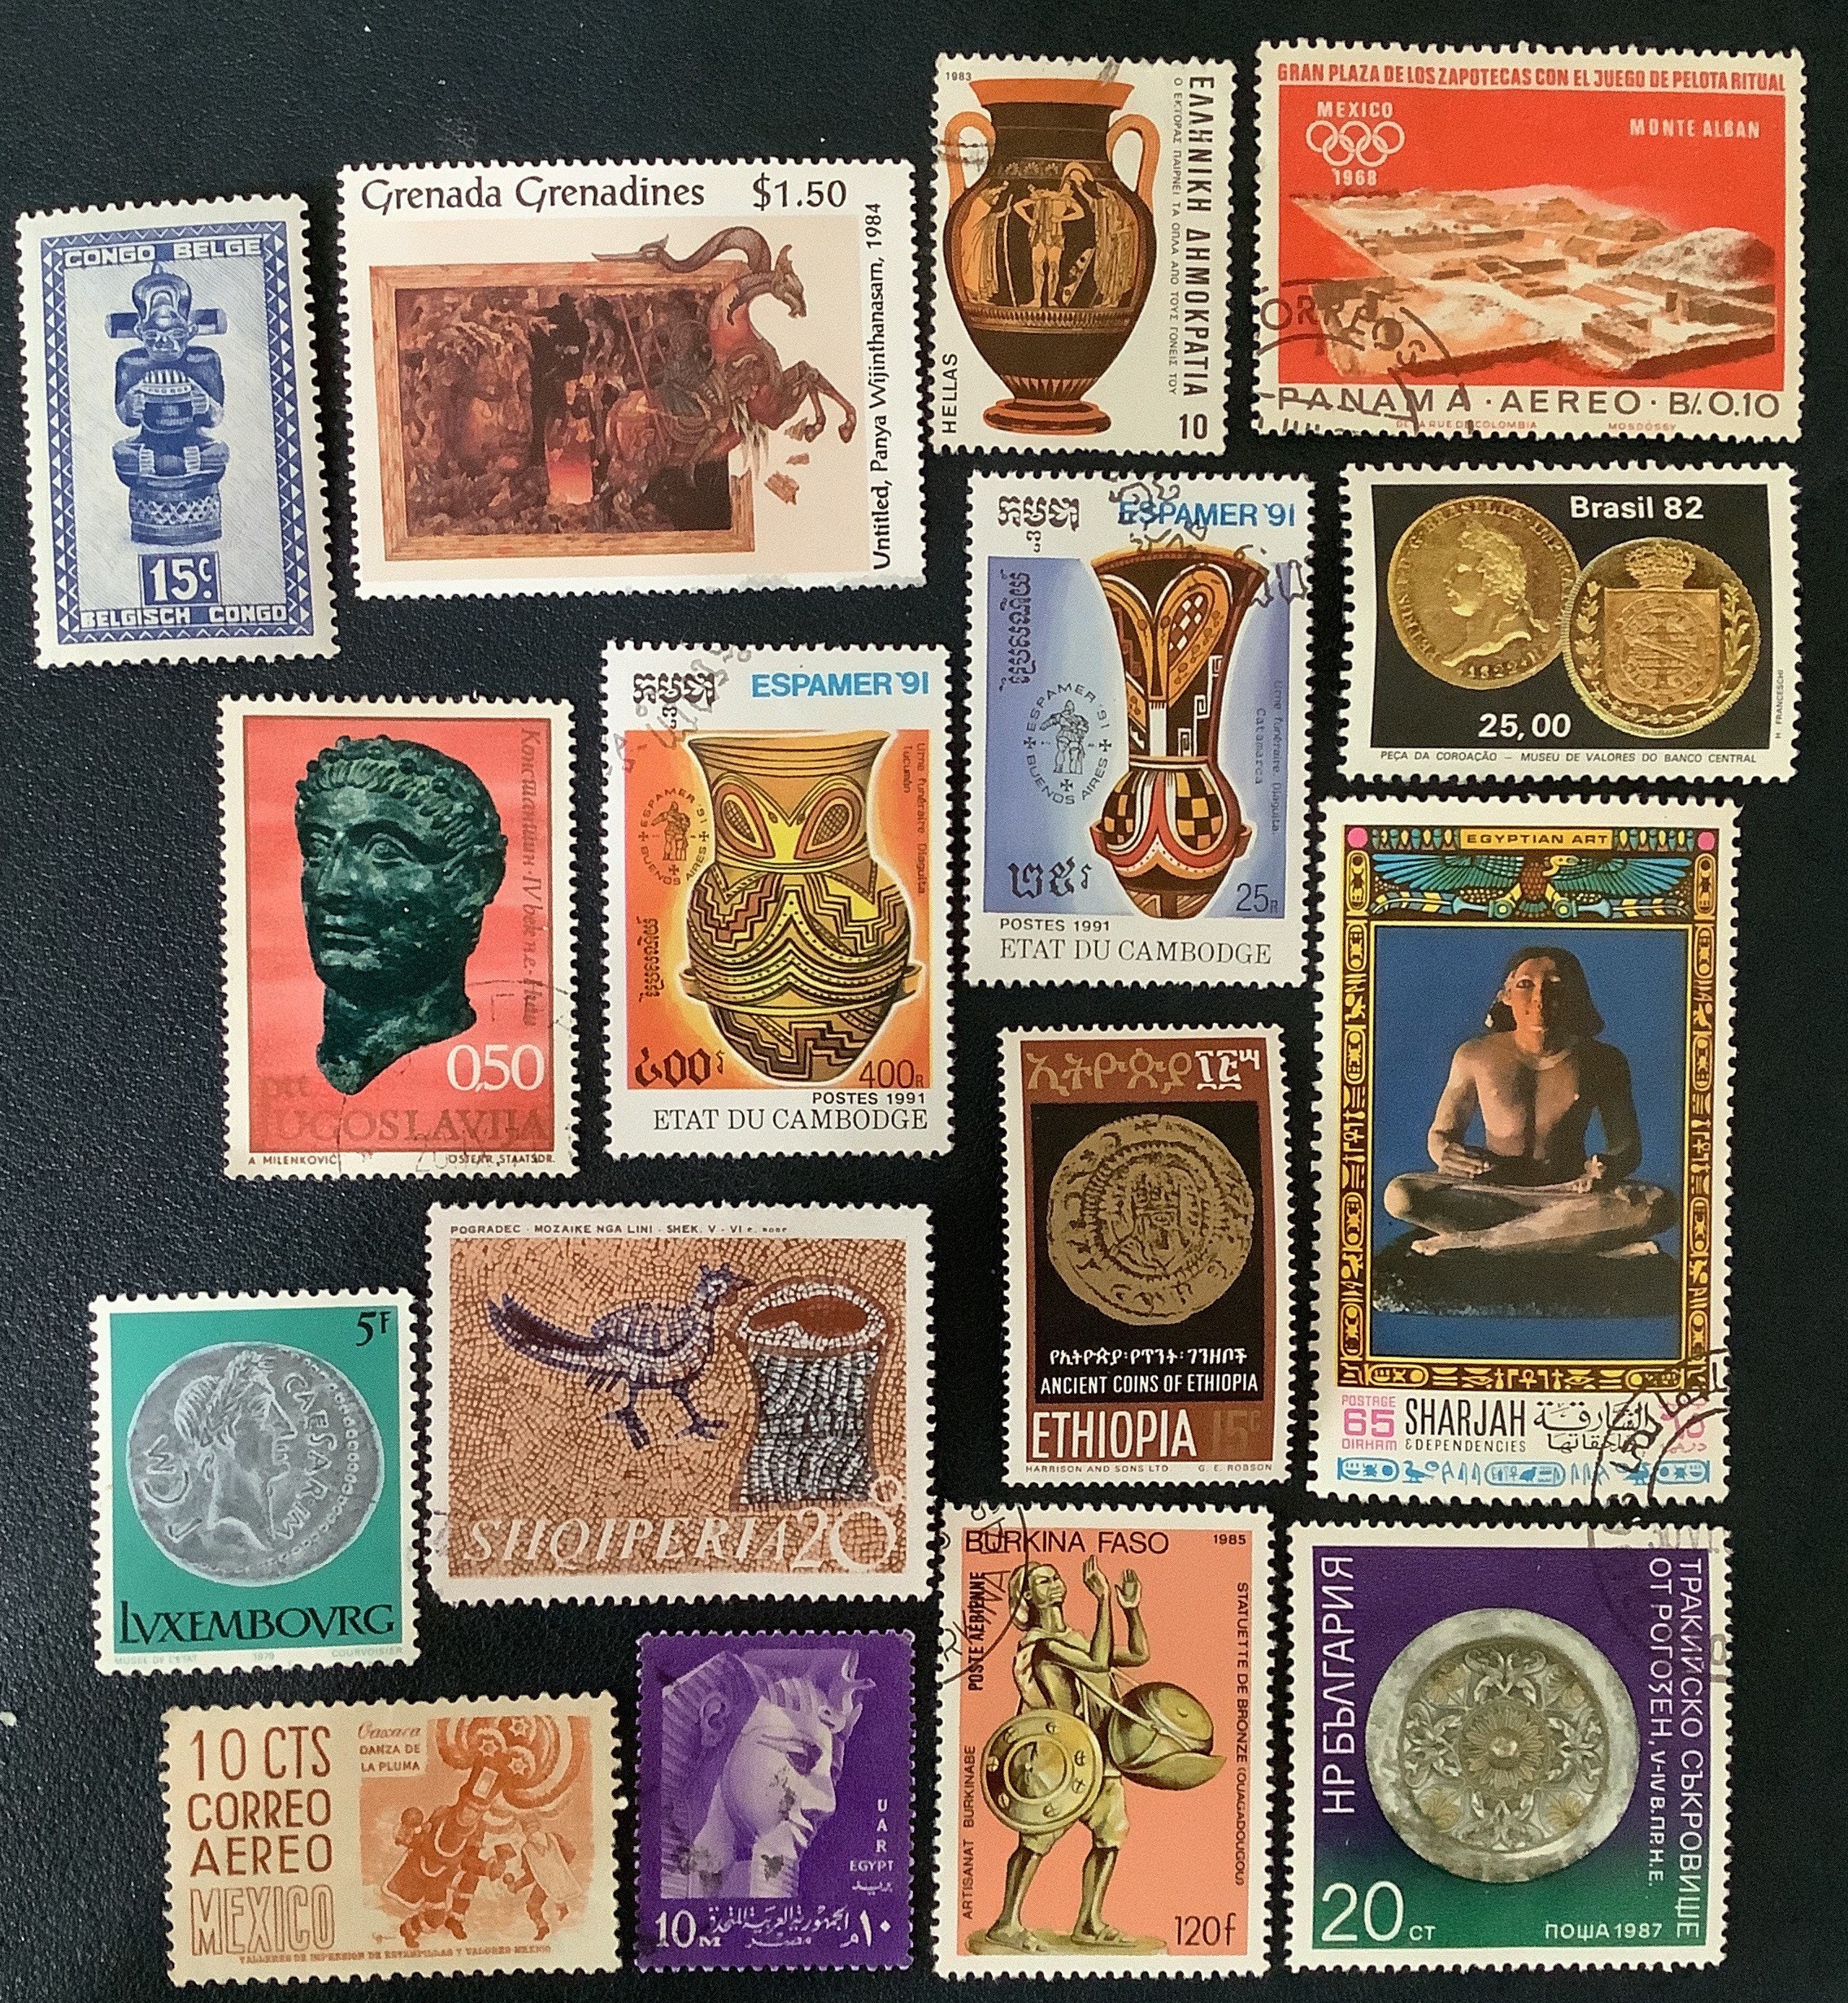 GIANT LOT of 100 Mint Lightly Cancelled World Postage Stamps